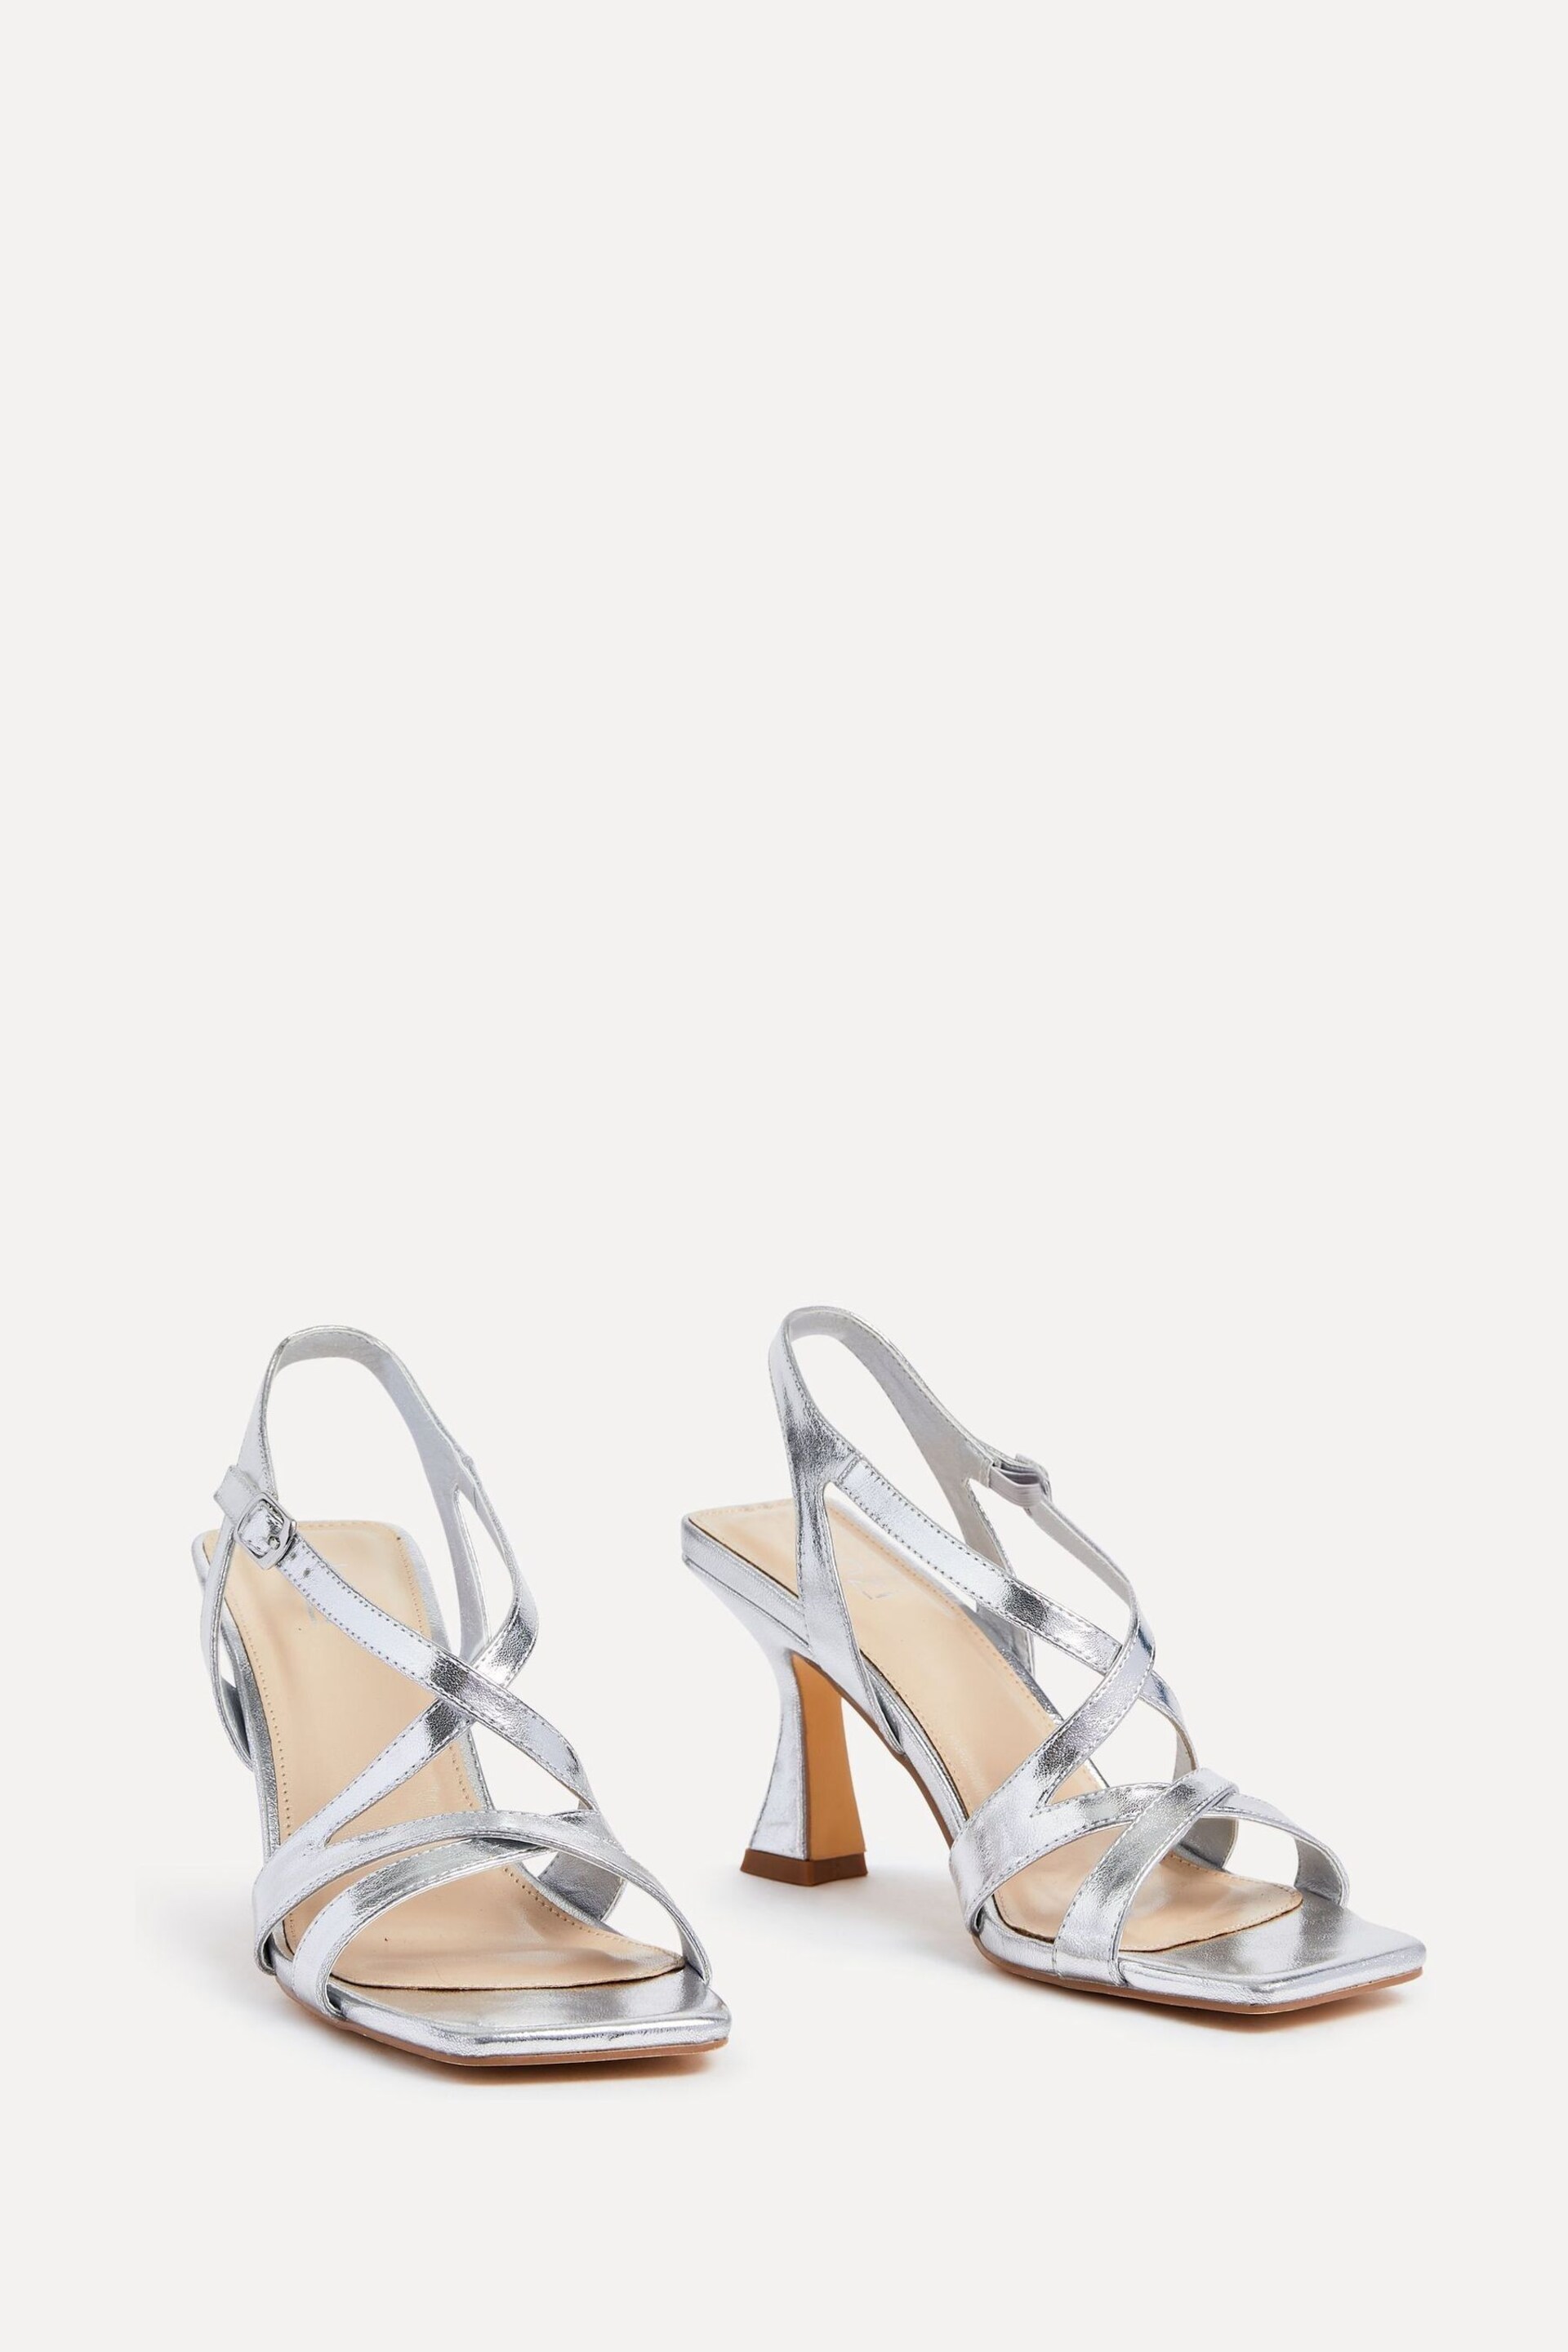 Linzi Silver Liberty Open Toe Strappy Heeled Sandals With Flared Stiletto - Image 3 of 4